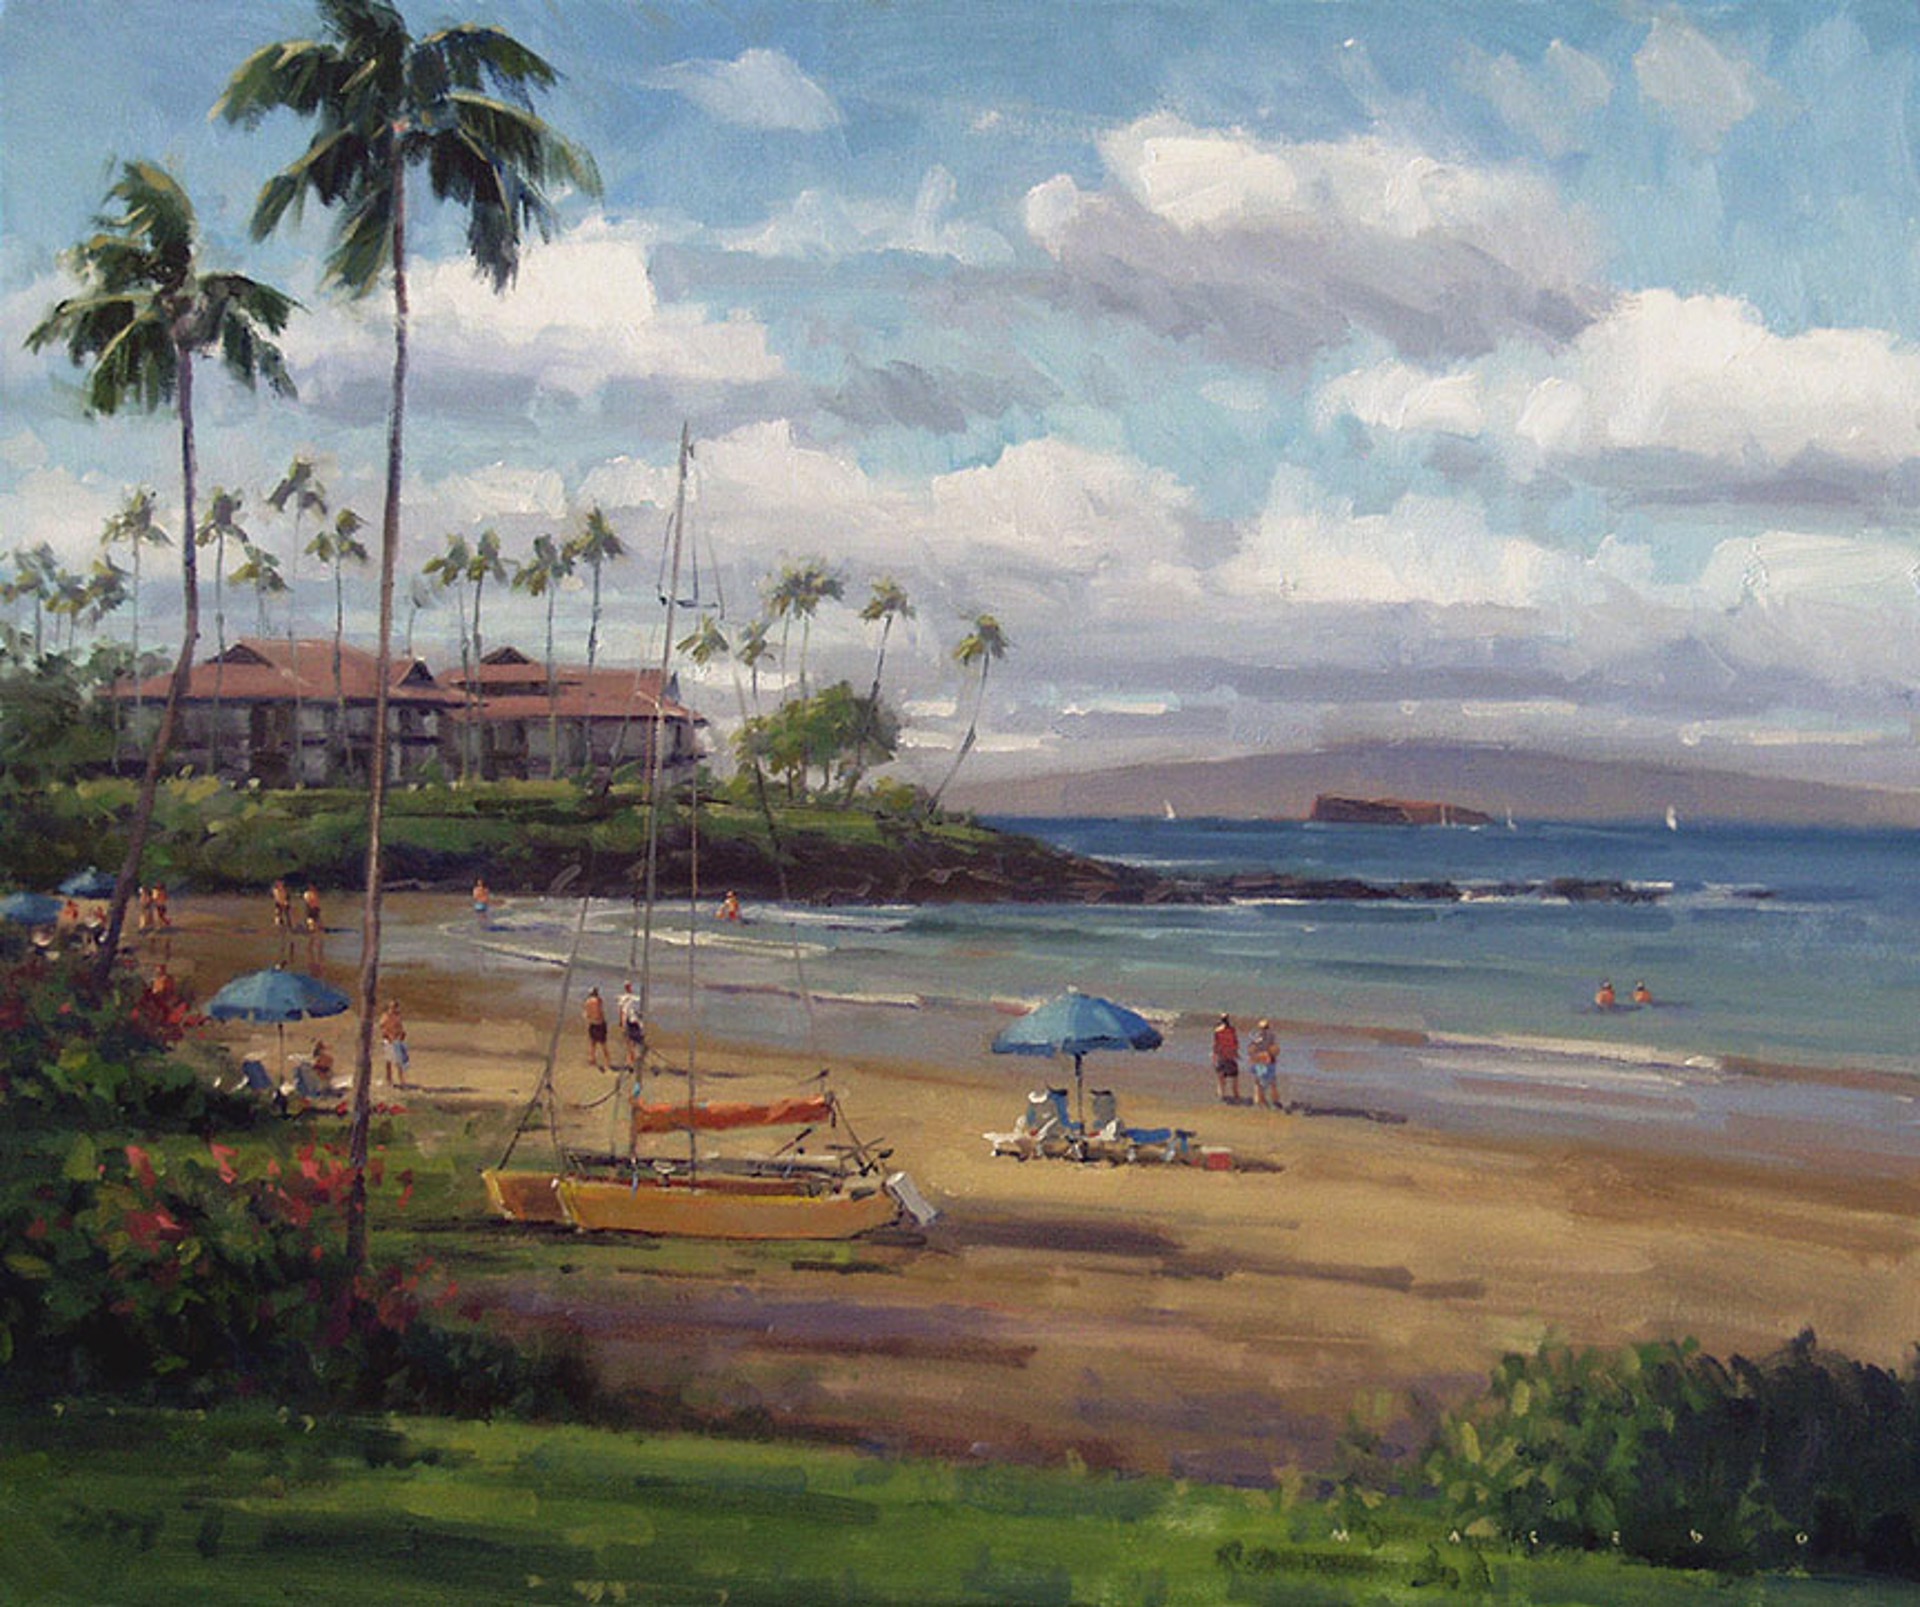 Fun And Beauty, Wailea - SOLD by Commission Possibilities / Previously Sold ZX